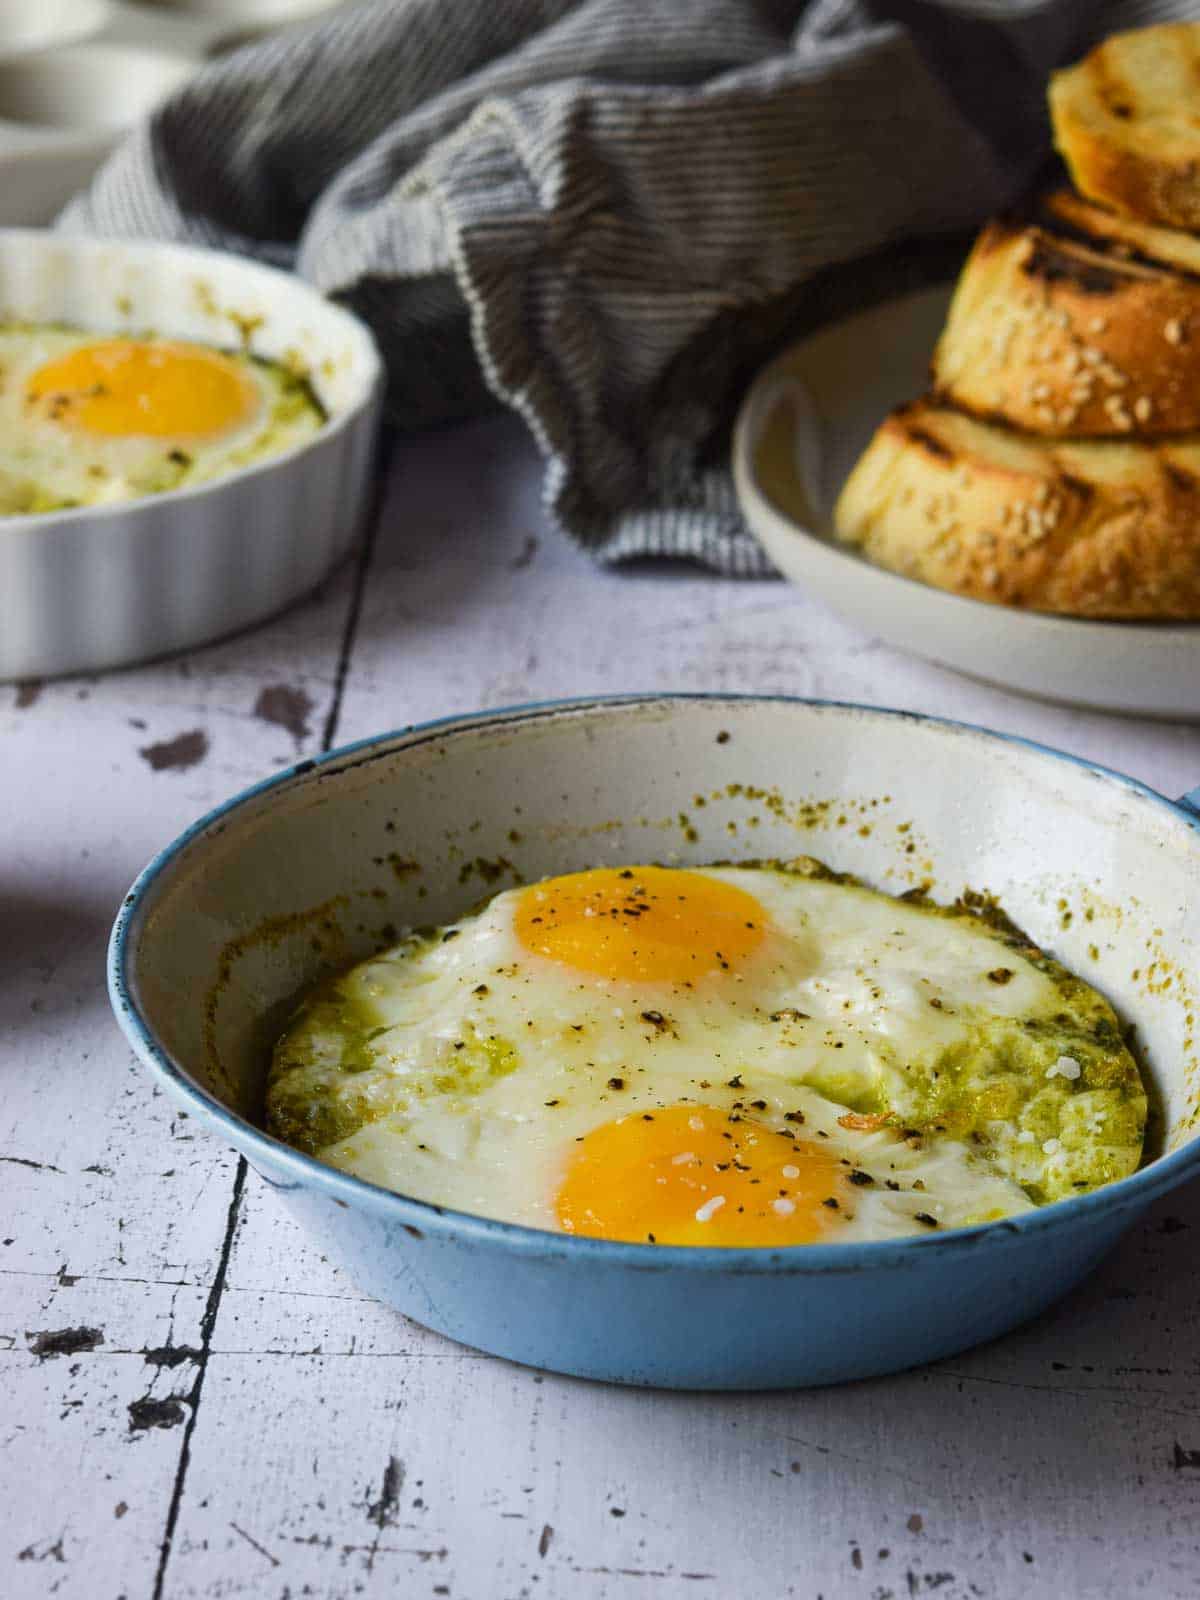 Pesto baked eggs in a blue skillet on a white surface.